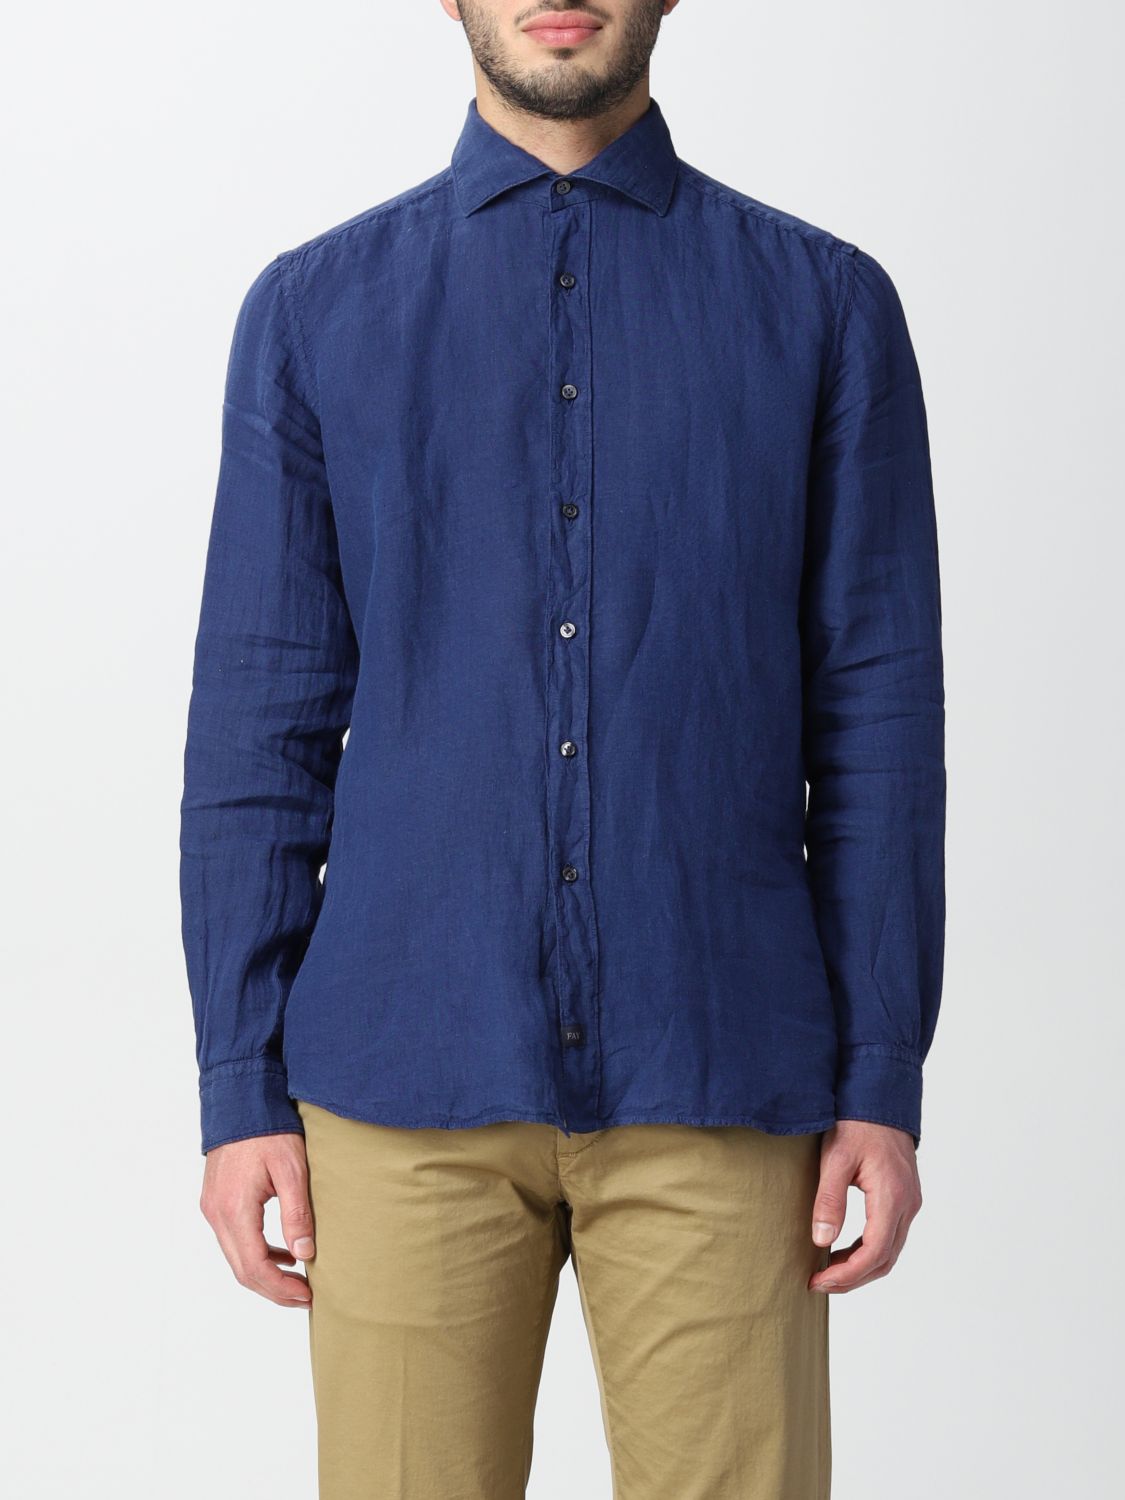 Fay Outlet: shirt for man - Blue | Fay shirt NCMA144259THTK online on ...